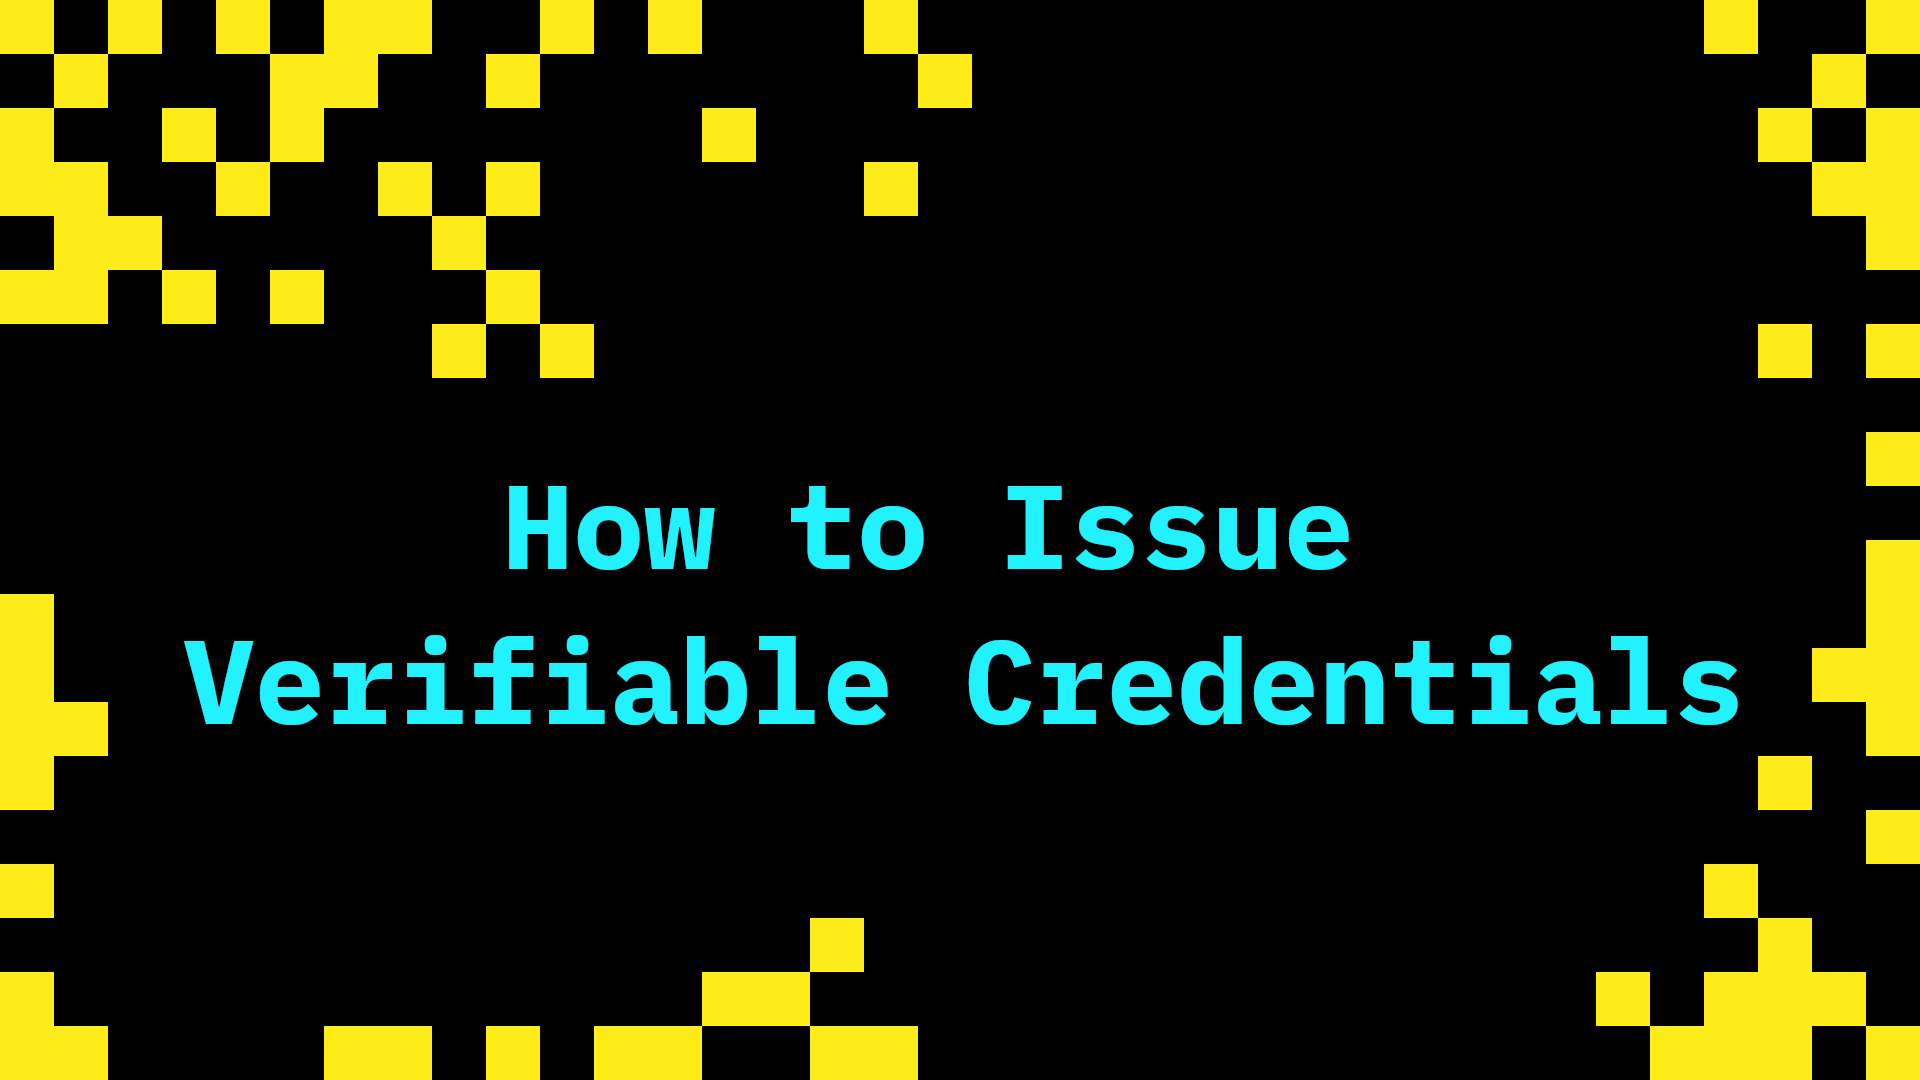 Manually Issue a Verifiable Credential